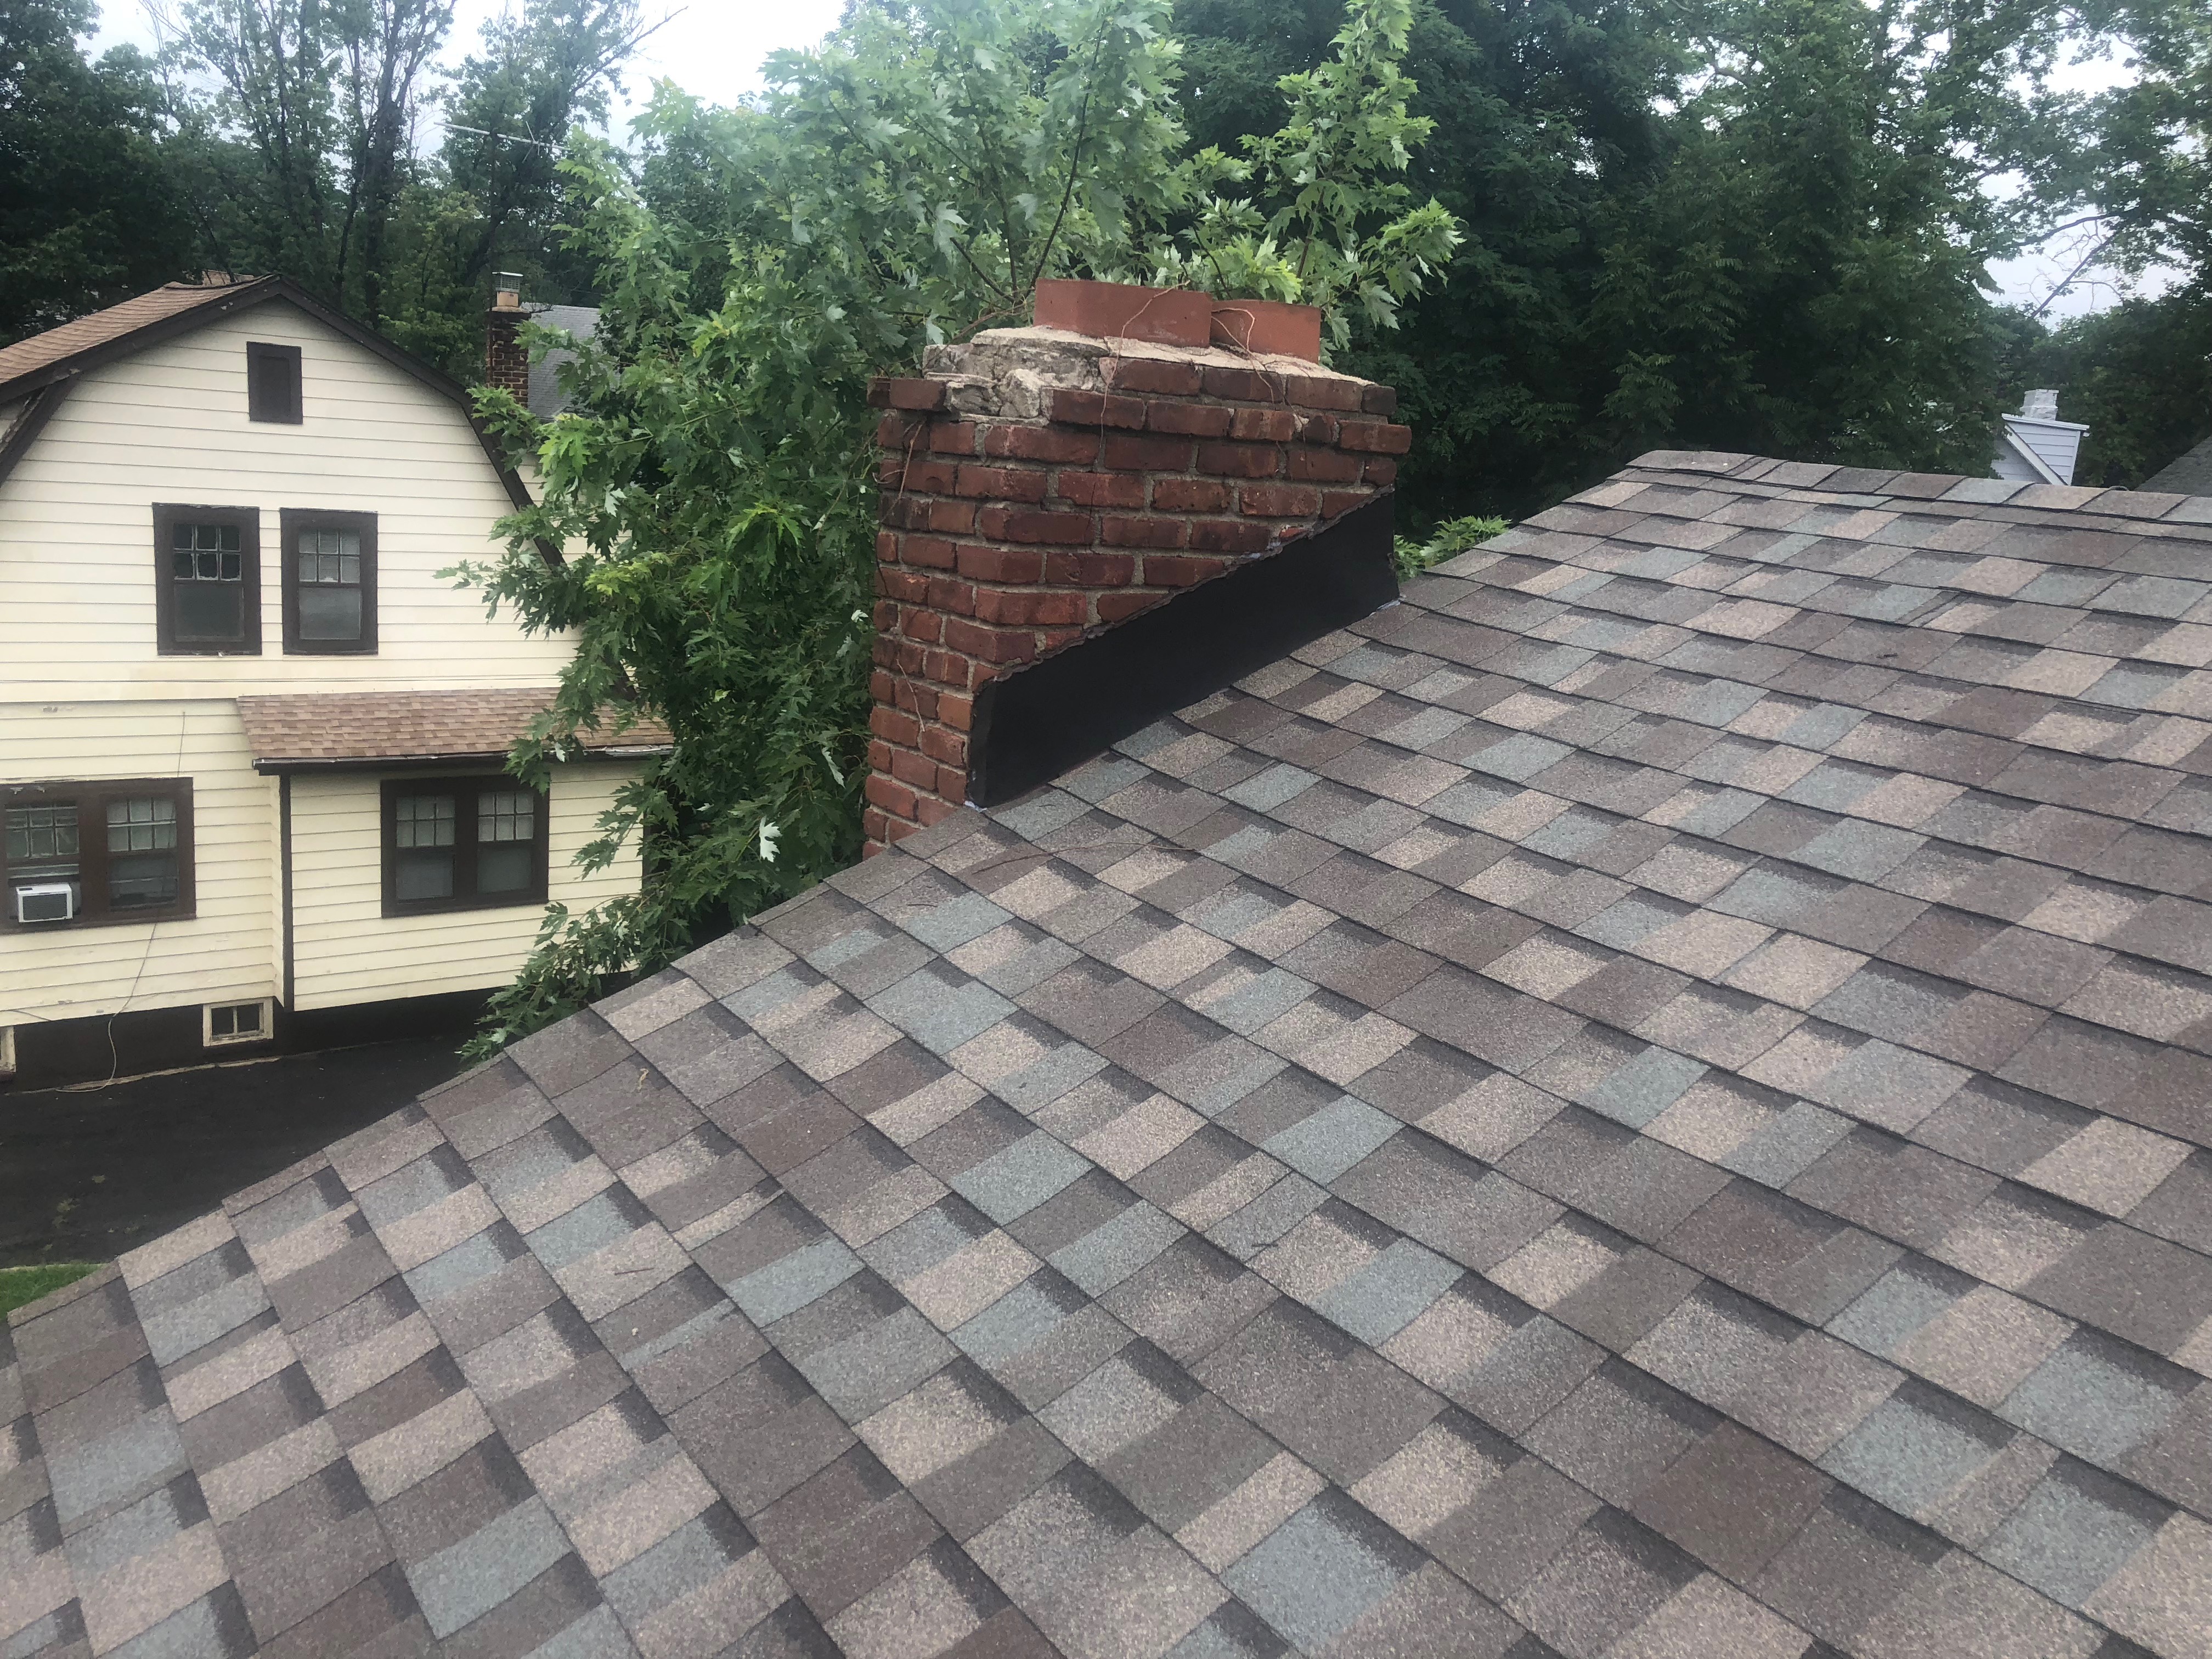 install new Shingle roof in Orange New Jersey New Jersey Roofing Maintenance